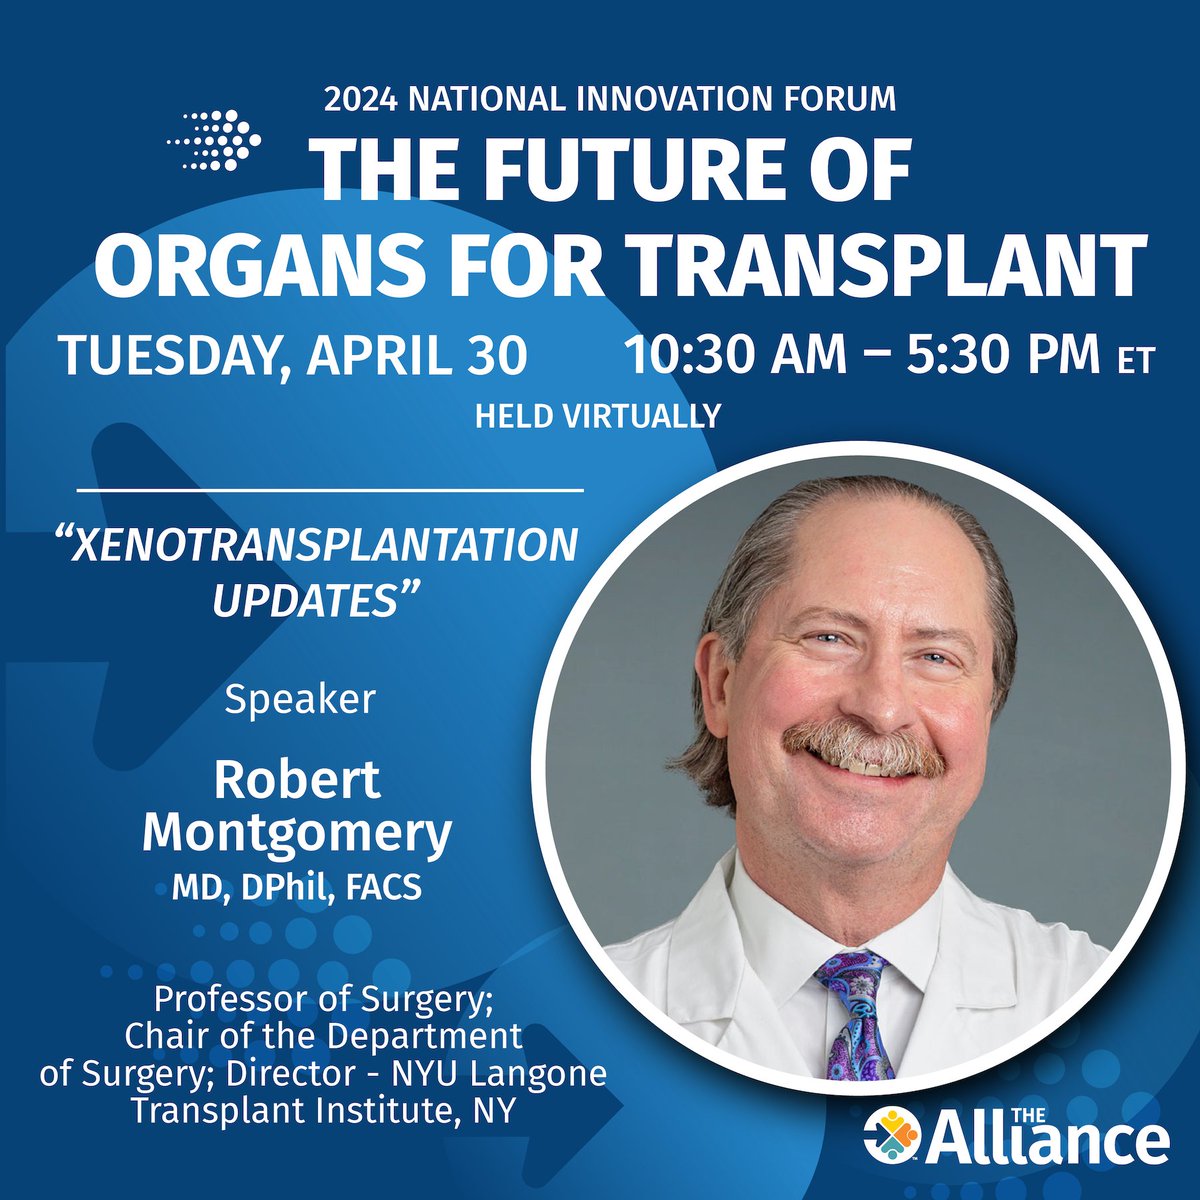 🌟 Exciting news! 🌟 Join us TOMORROW, April 30th, for an exclusive discussion on #Xenotransplantation featuring Dr. Robert Montgomery, Chair of Surgery & Director of NYU Langone Transplant Institute, and other top experts. Don't miss out—register now: bit.ly/3vRPp3d